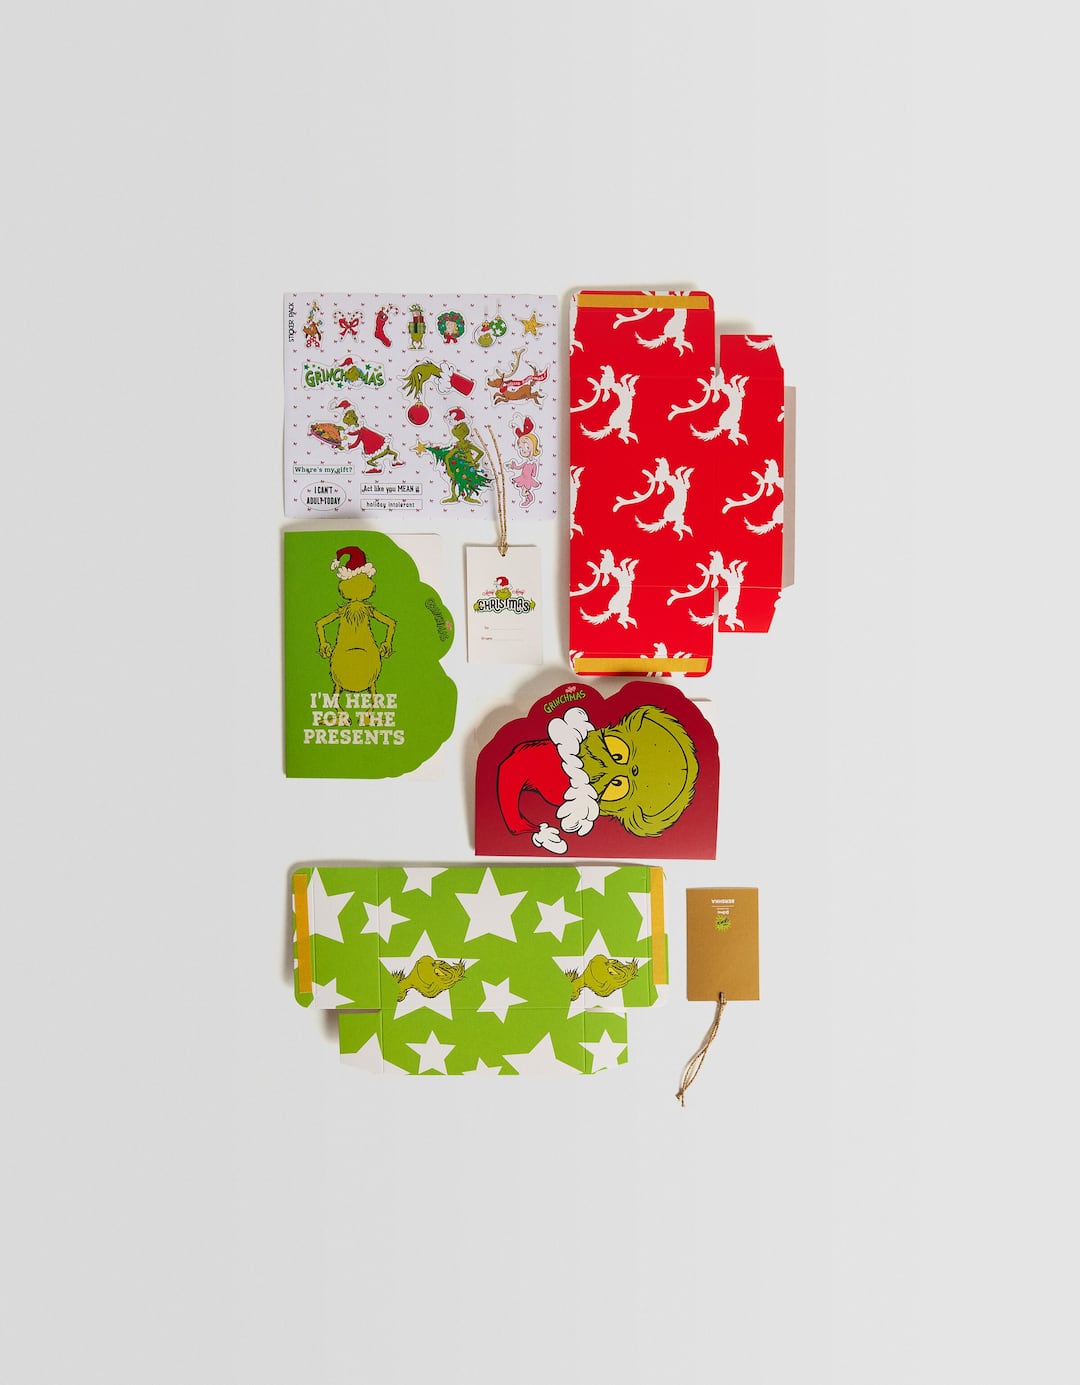 The Grinch gift wrapping kit